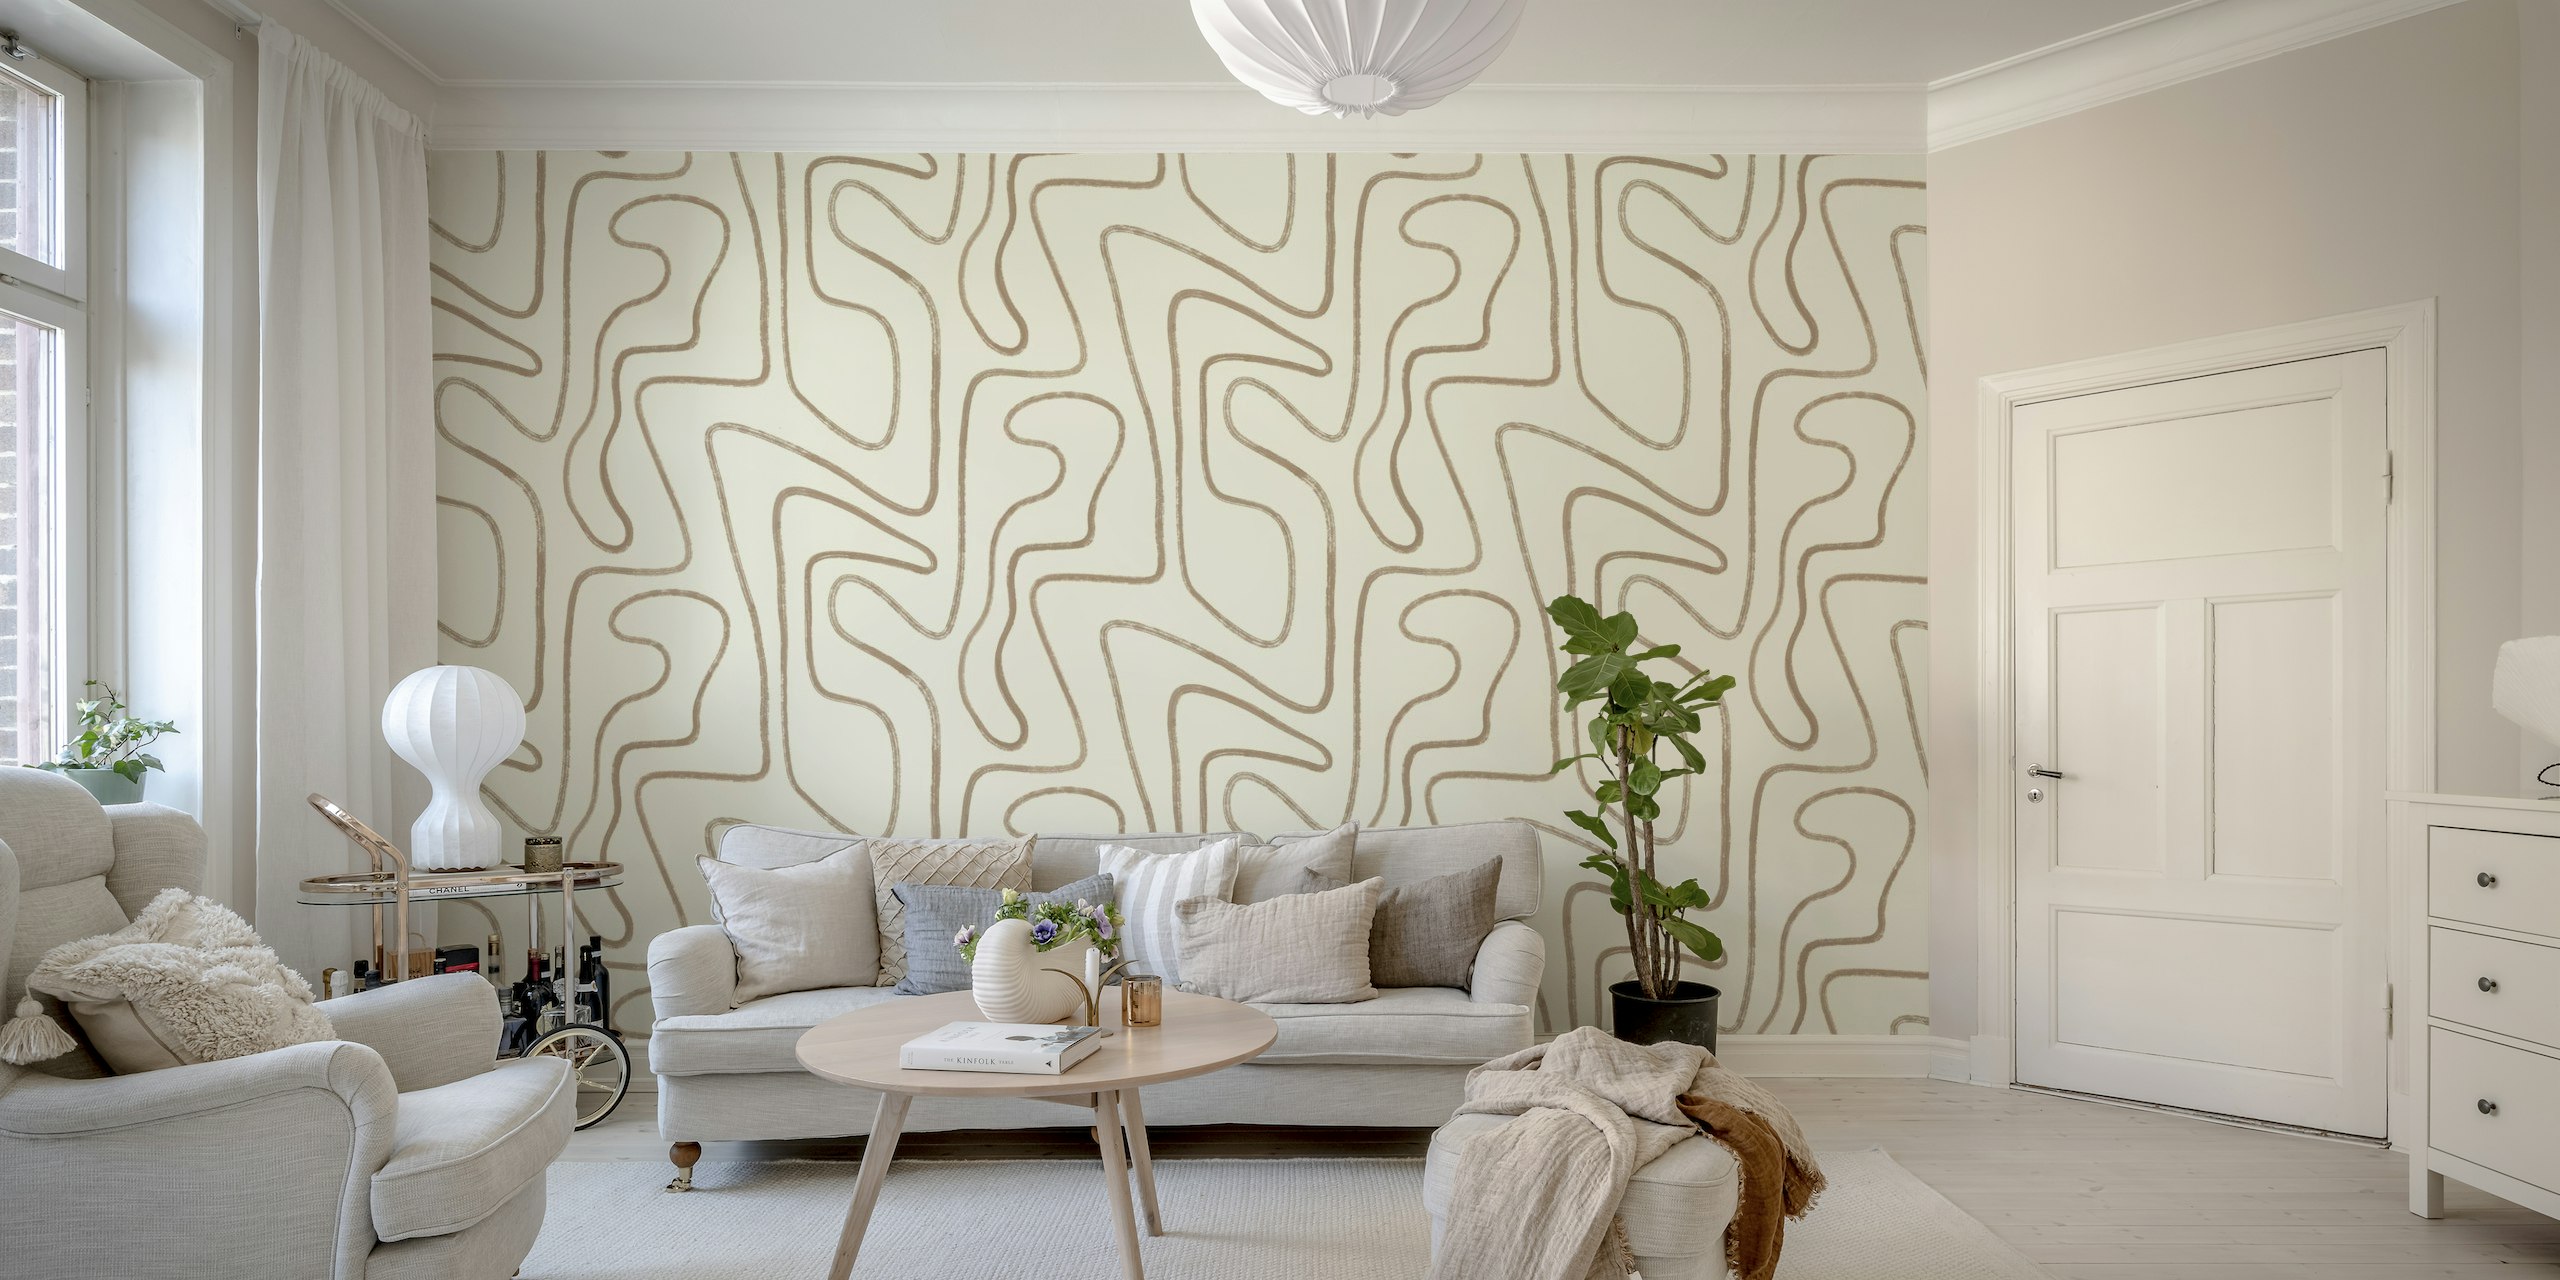 Abstract Lines in Tan Earth Tones Hand Drawn Wall Mural